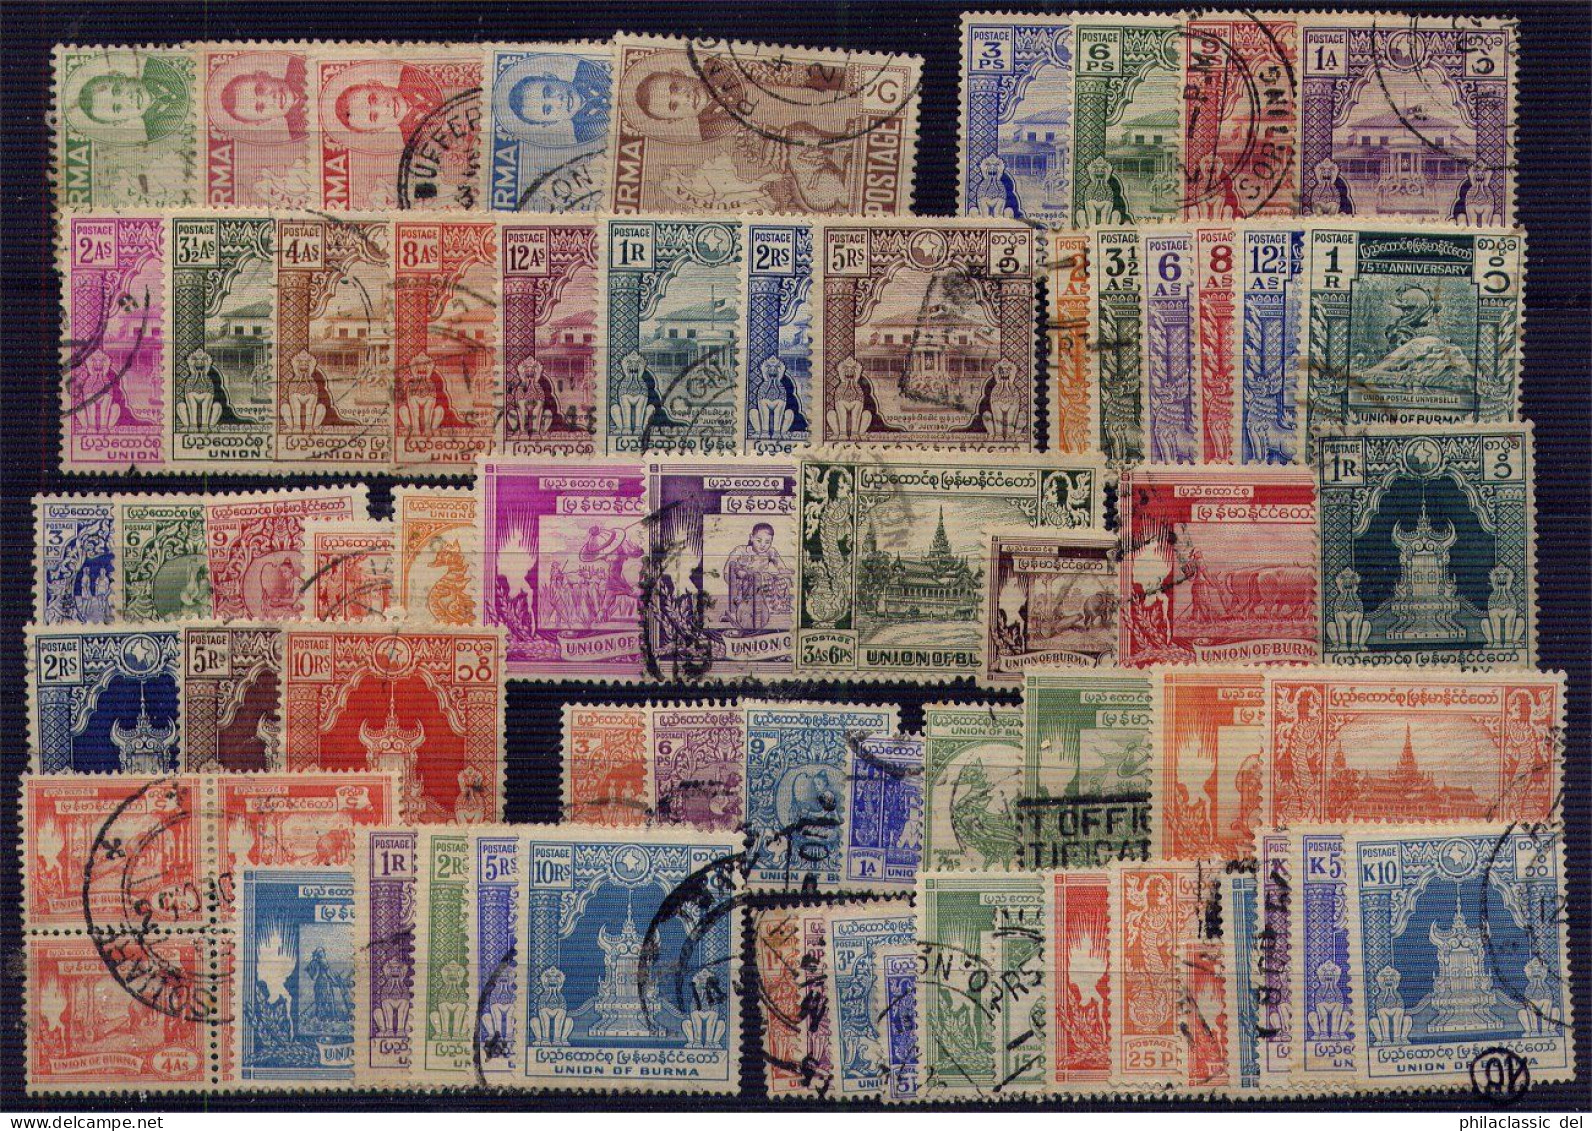 BURMA 1938 - 1954, Very Nice Nearly Complete Collection Fine Cancelled Cat Val 1150 Pounds - Burma (...-1947)